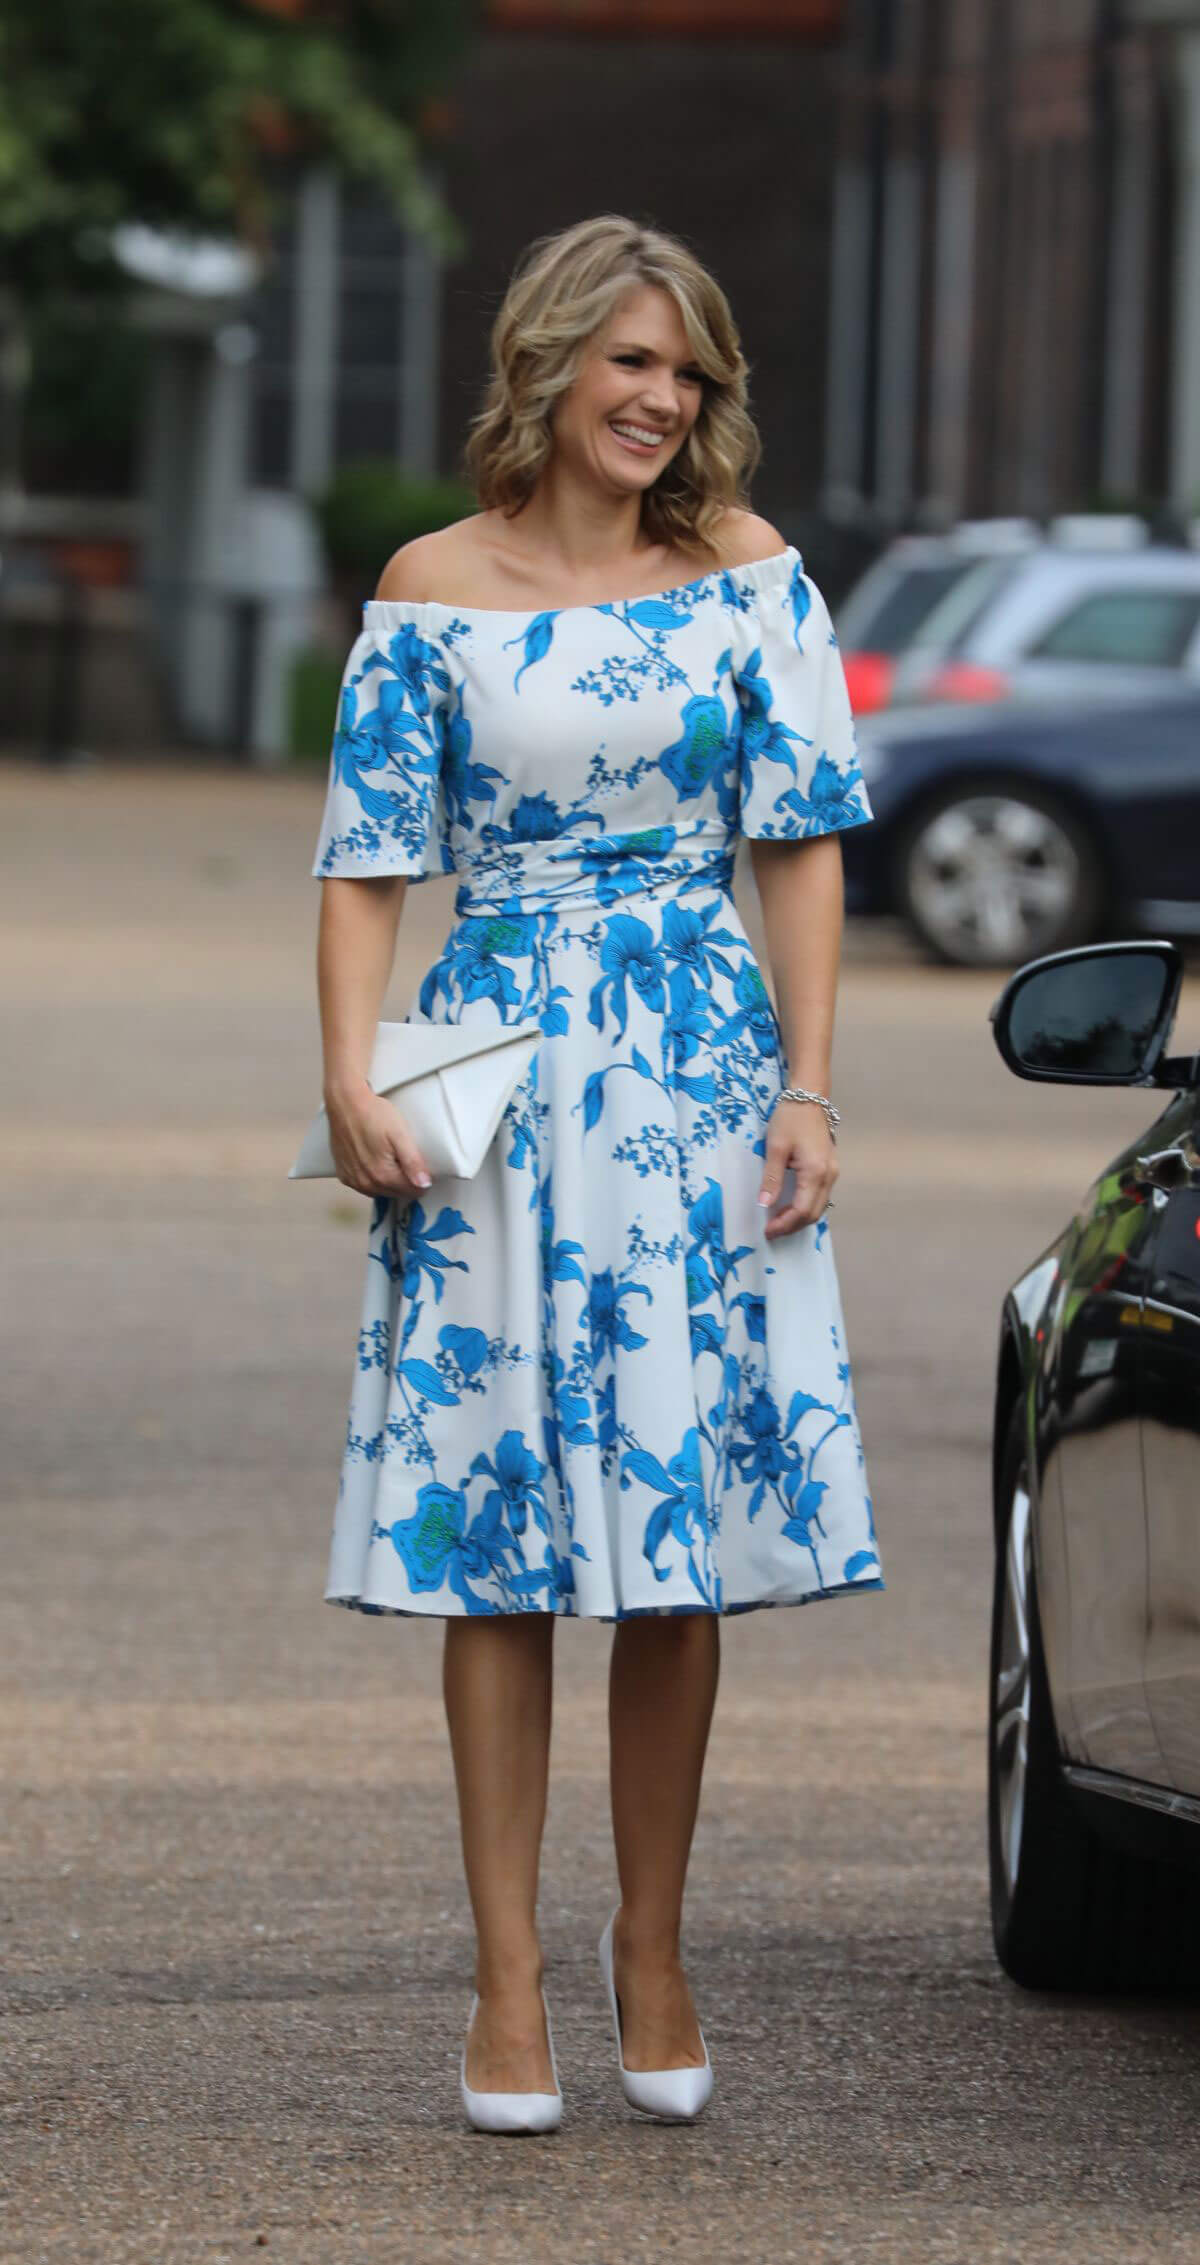 Charlotte Hawkins at ITV Summer Reception in London Images